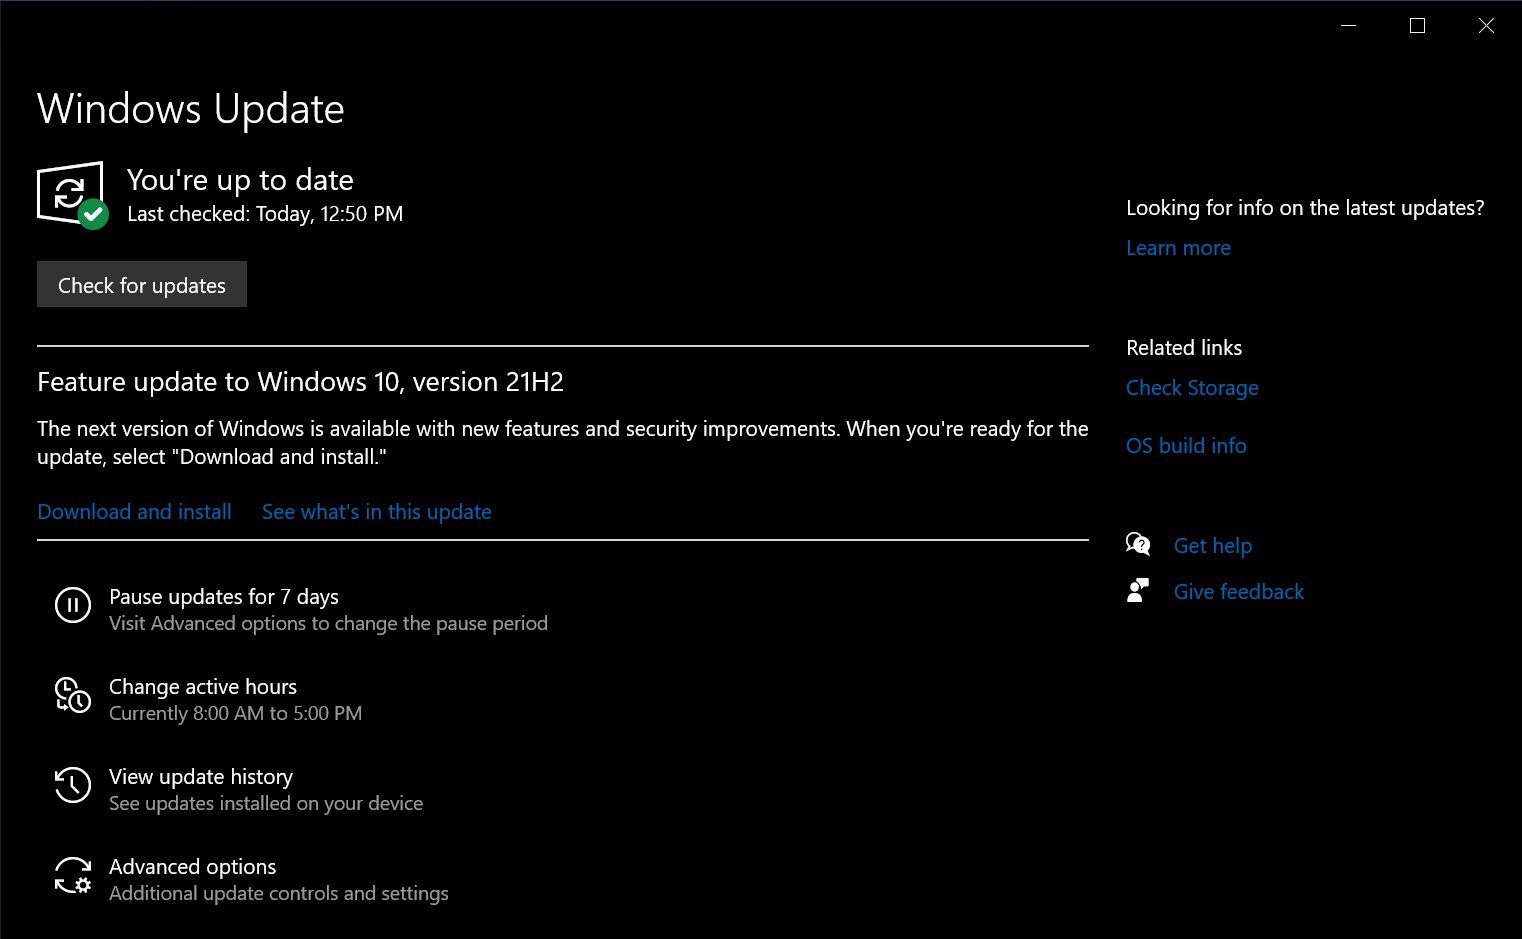 Huh. We're offered the 'Release Preview' build of Windows 10 version 21H2 ??